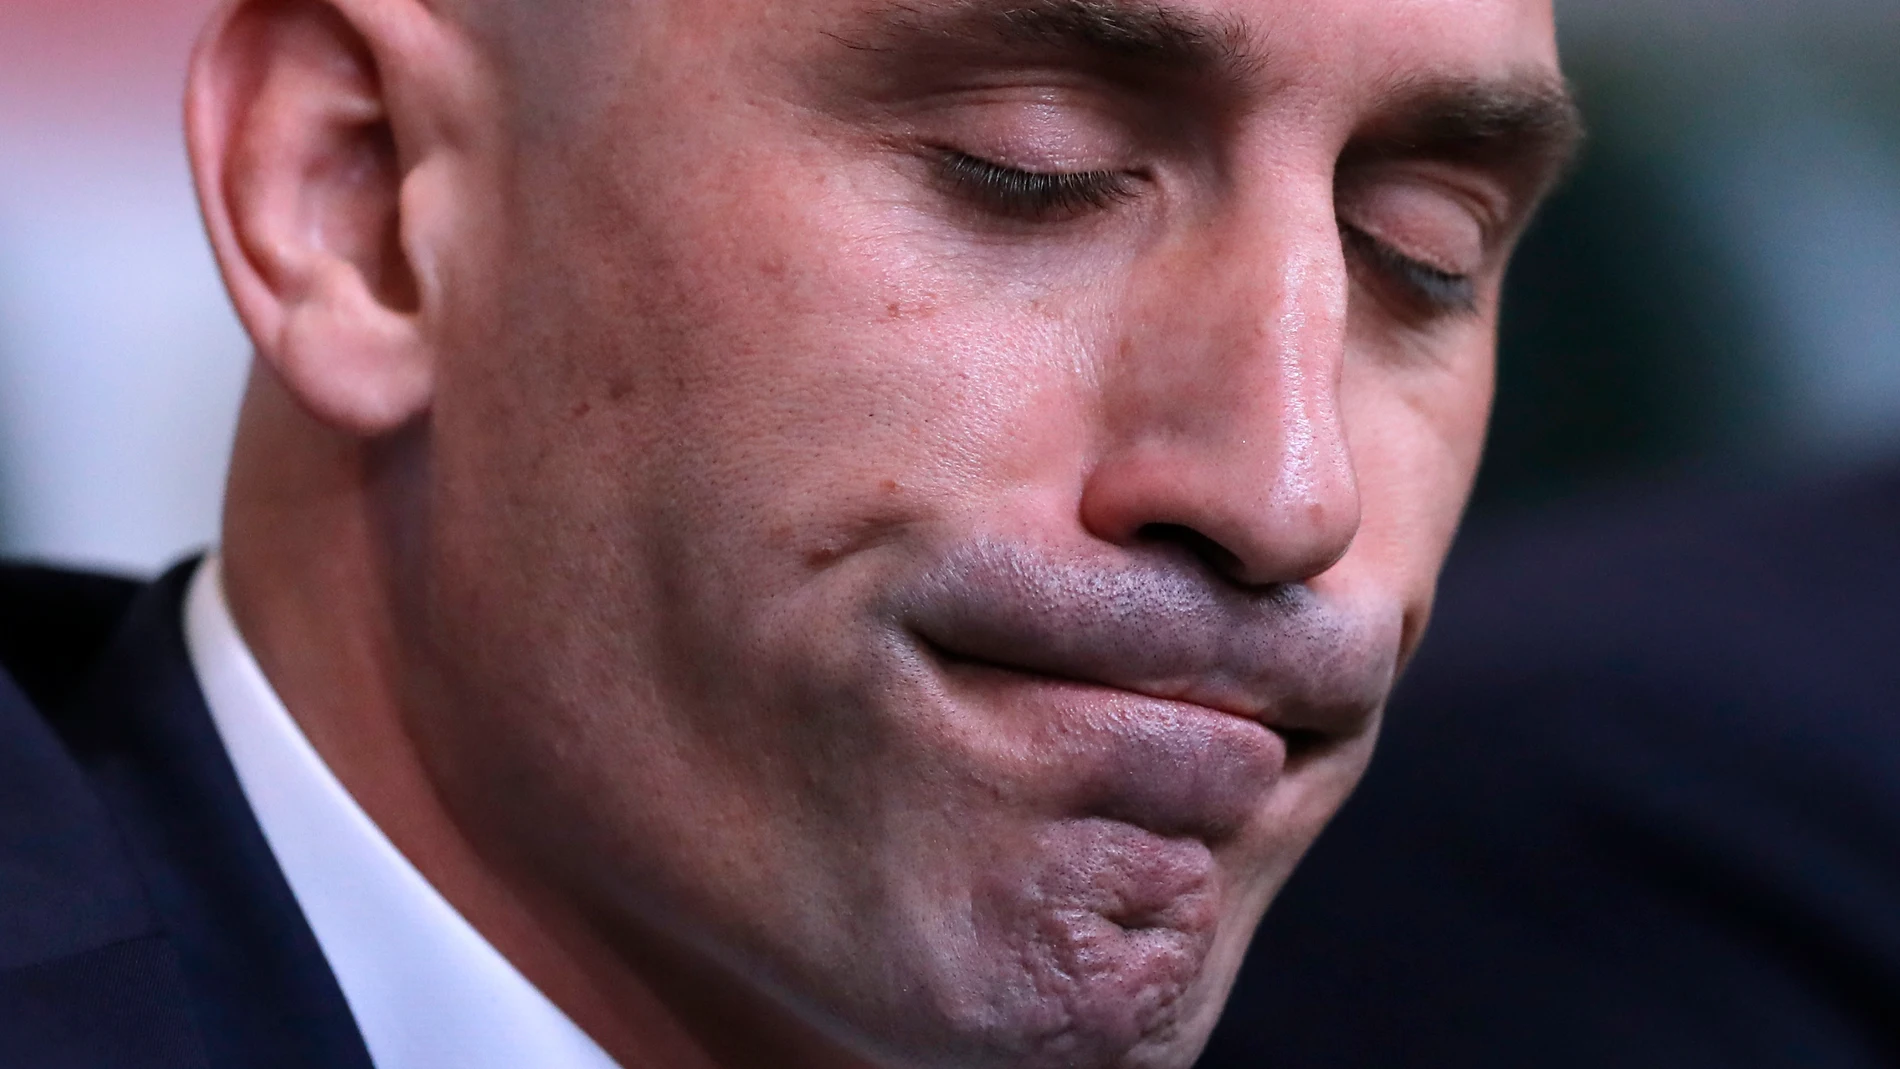 FILE - Spanish football president Luis Rubiales grimaces during a press conference at the 2018 soccer World Cup in Krasnodar, Russia, Wednesday, June 13, 2018. FIFA has banned ousted former Spanish soccer federation president Luis Rubiales from the sport for three years. He was judged for misconduct at the Women’s World Cup final where he forcibly kissed a player on the lips at the trophy ceremony. FIFA did not publish details of the verdict reached by its disciplinary committee judges. (AP P...